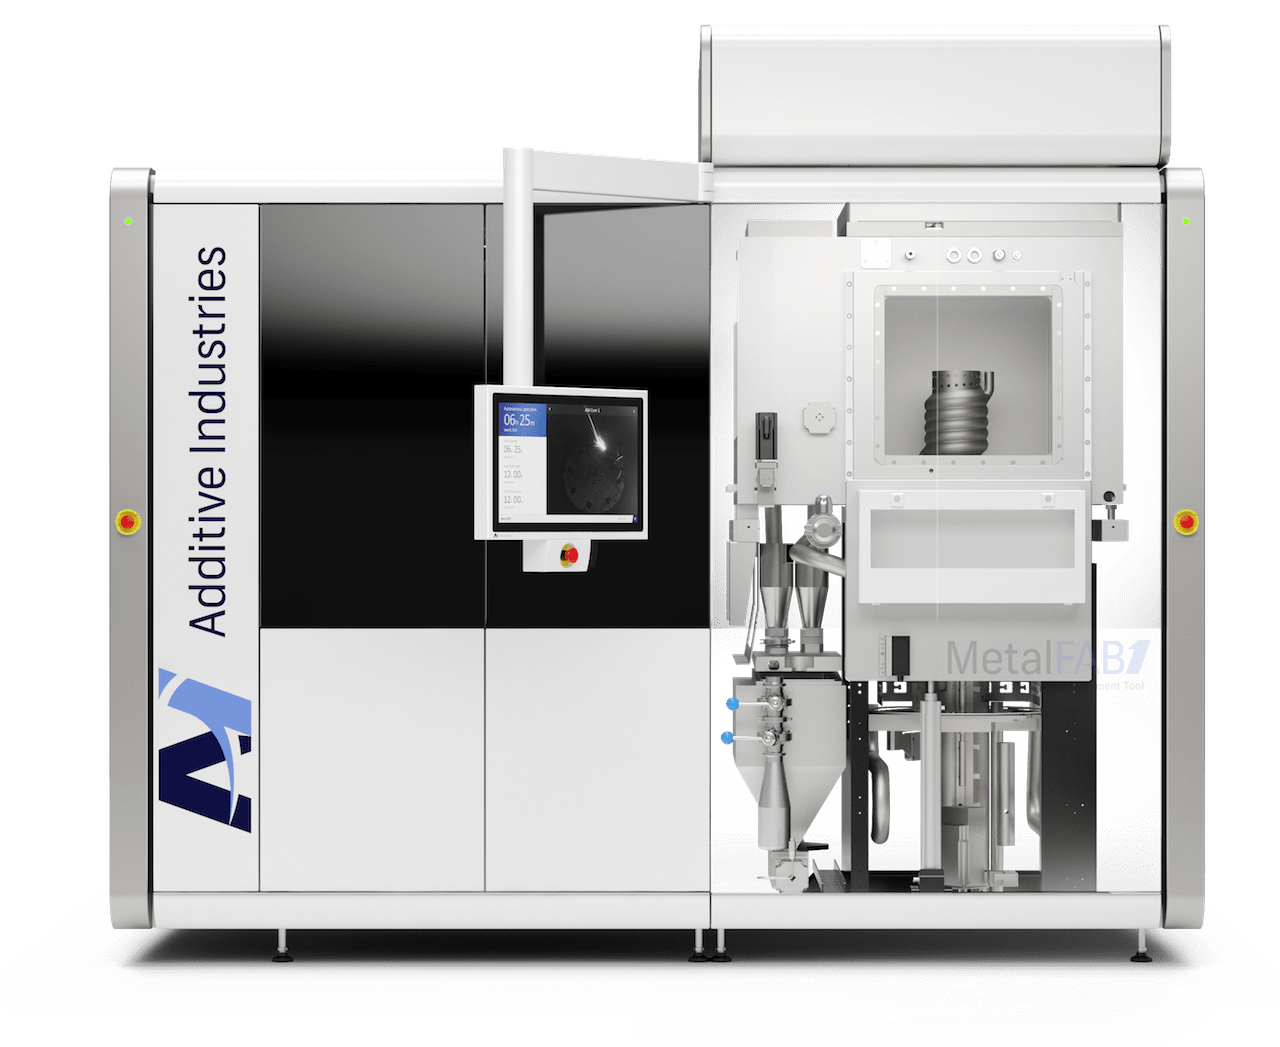  An inside view of the new MetalFAB1 Process & Application Development Tool from Additive Industries 